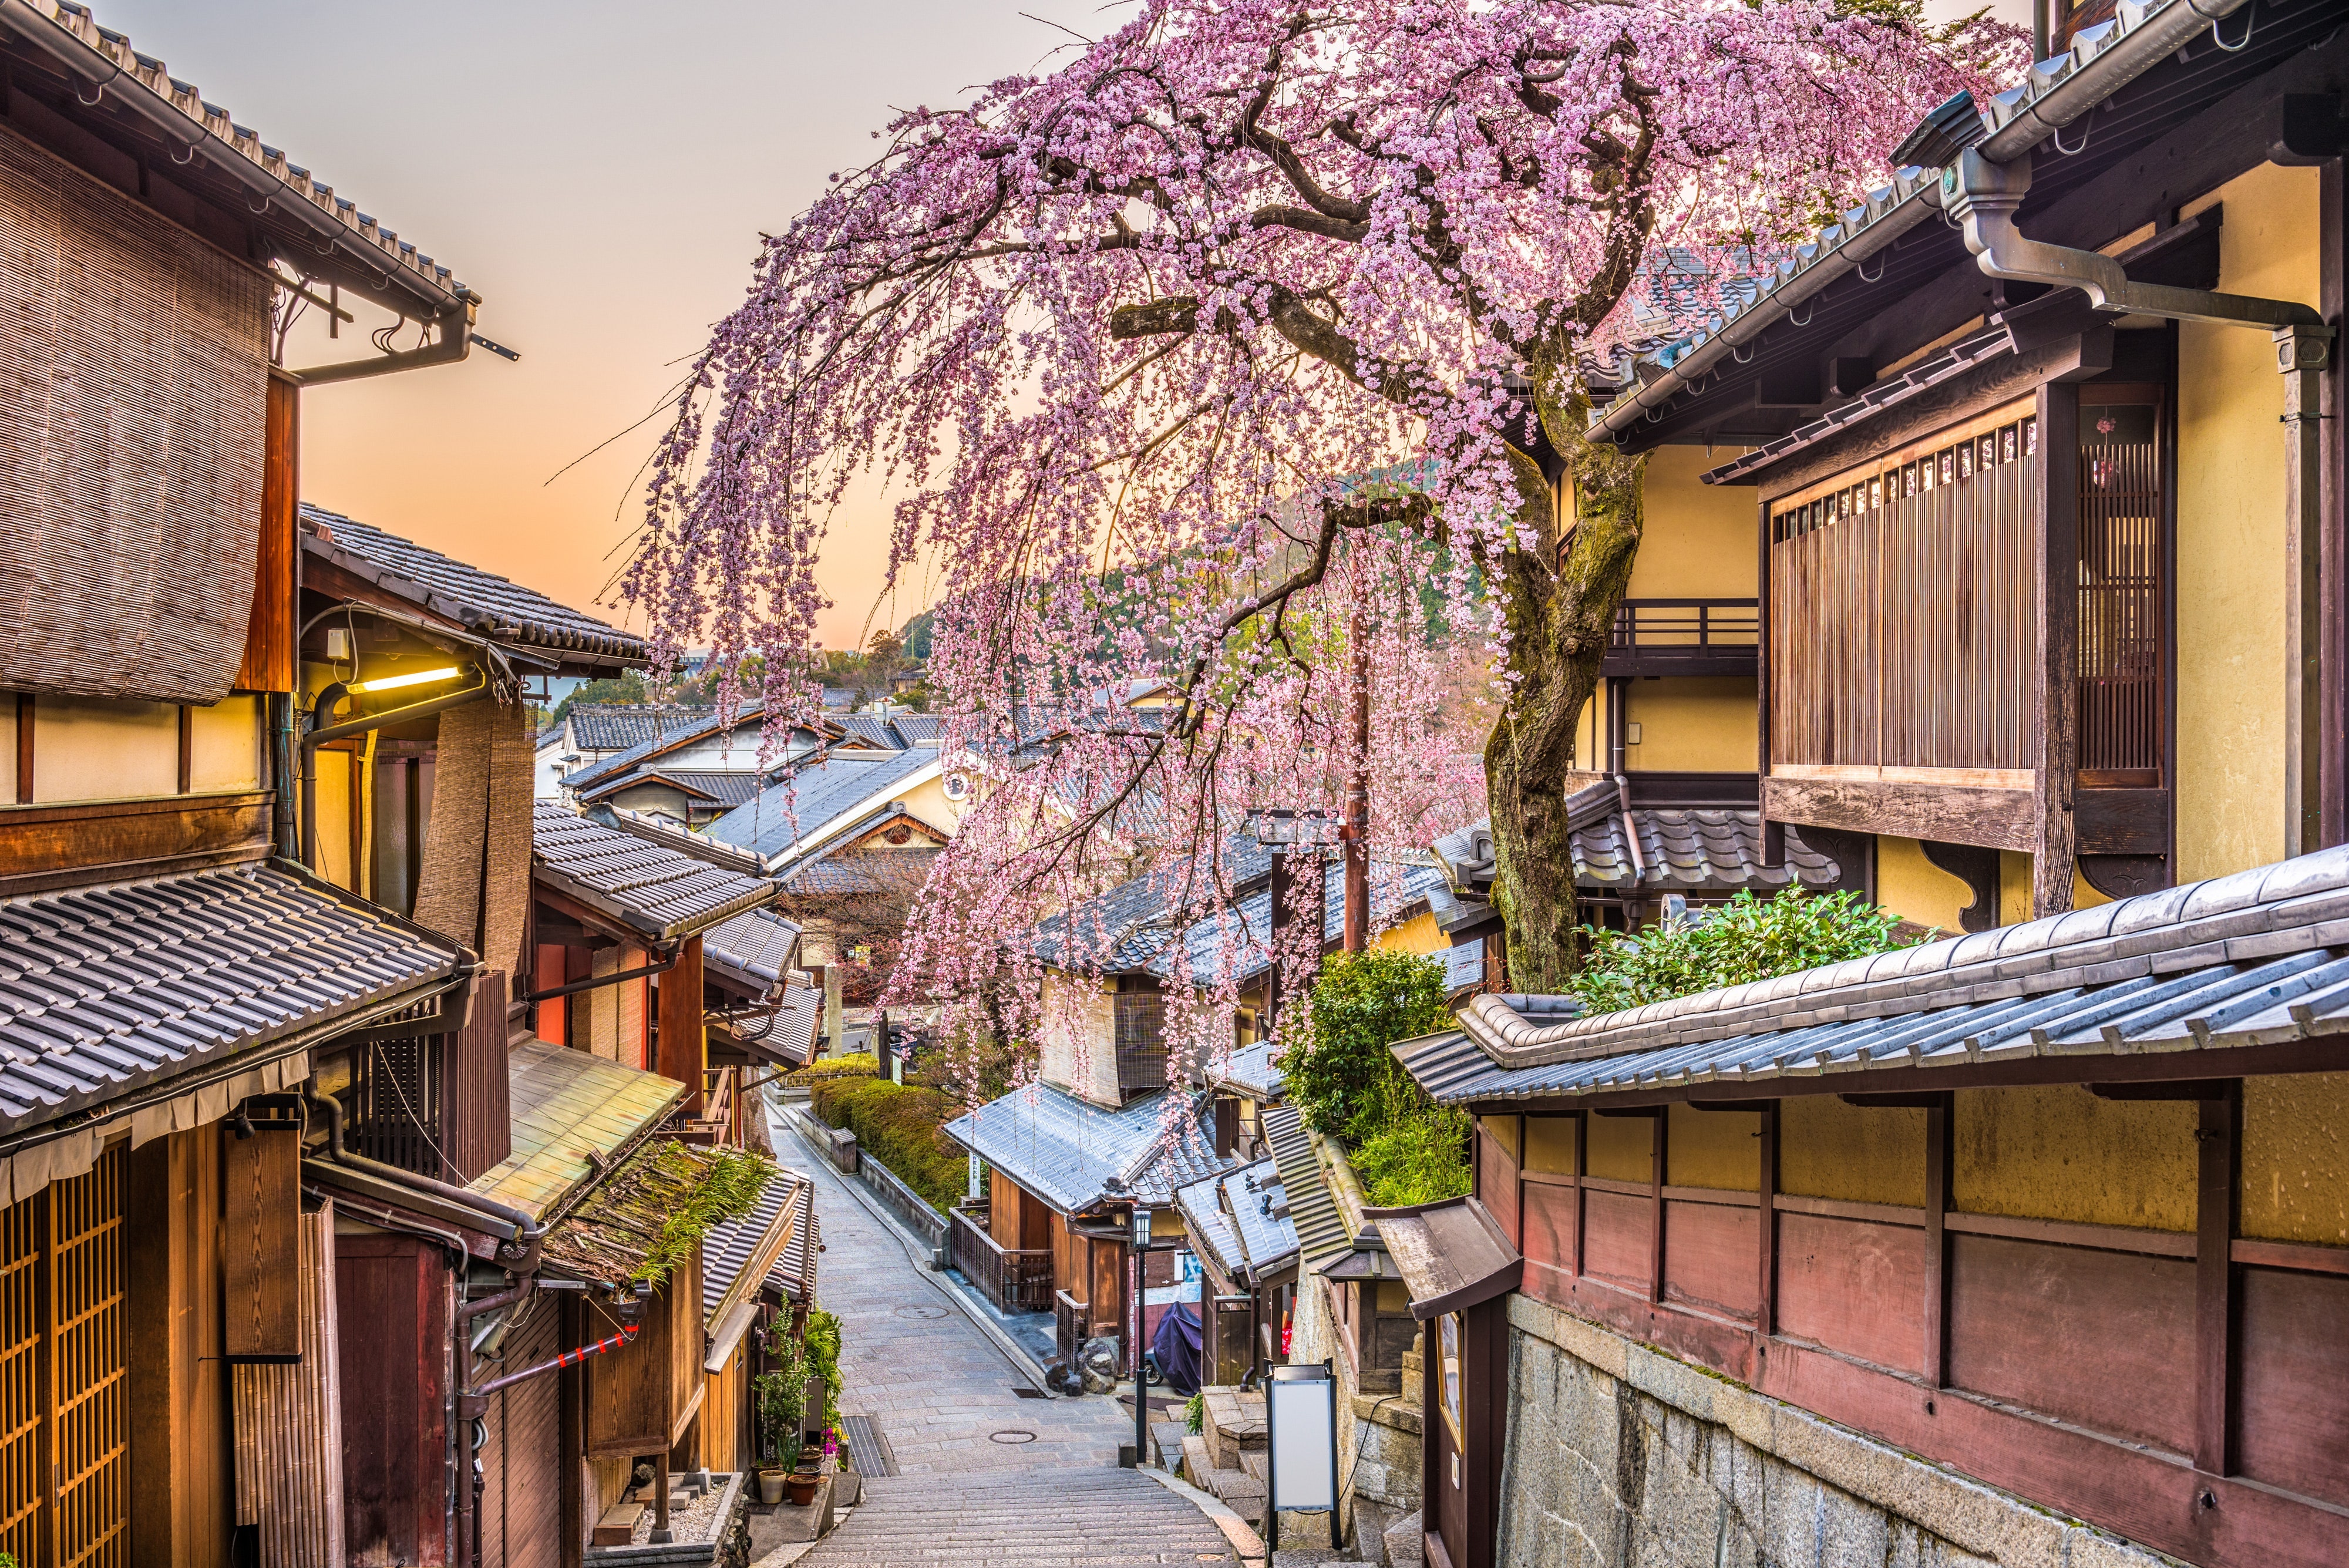 The Higashiyama-ku ward is one of the best places to experience <a href="https://www.cntraveler.com/story/kyoto-japan-masataka-hosoo-locals-guide?mbid=synd_msn_rss&utm_source=msn&utm_medium=syndication">traditional Kyoto</a>, from the Kiyomizudera and Yasaka Shrines to the Gion geisha district. Thank goodness the narrow lanes throughout the district are pedestrian-only, because you don’t want to miss any of the ancient architectural details, merchants selling pottery and sweets, or hidden scatterings of pink-and-white <a href="https://www.cntraveler.com/gallery/best-places-to-see-cherry-blossoms-in-japan?mbid=synd_msn_rss&utm_source=msn&utm_medium=syndication">cherry blossoms</a>.<p>Sign up to receive the latest news, expert tips, and inspiration on all things travel</p><a href="https://www.cntraveler.com/newsletter/the-daily?sourceCode=msnsend">Inspire Me</a>